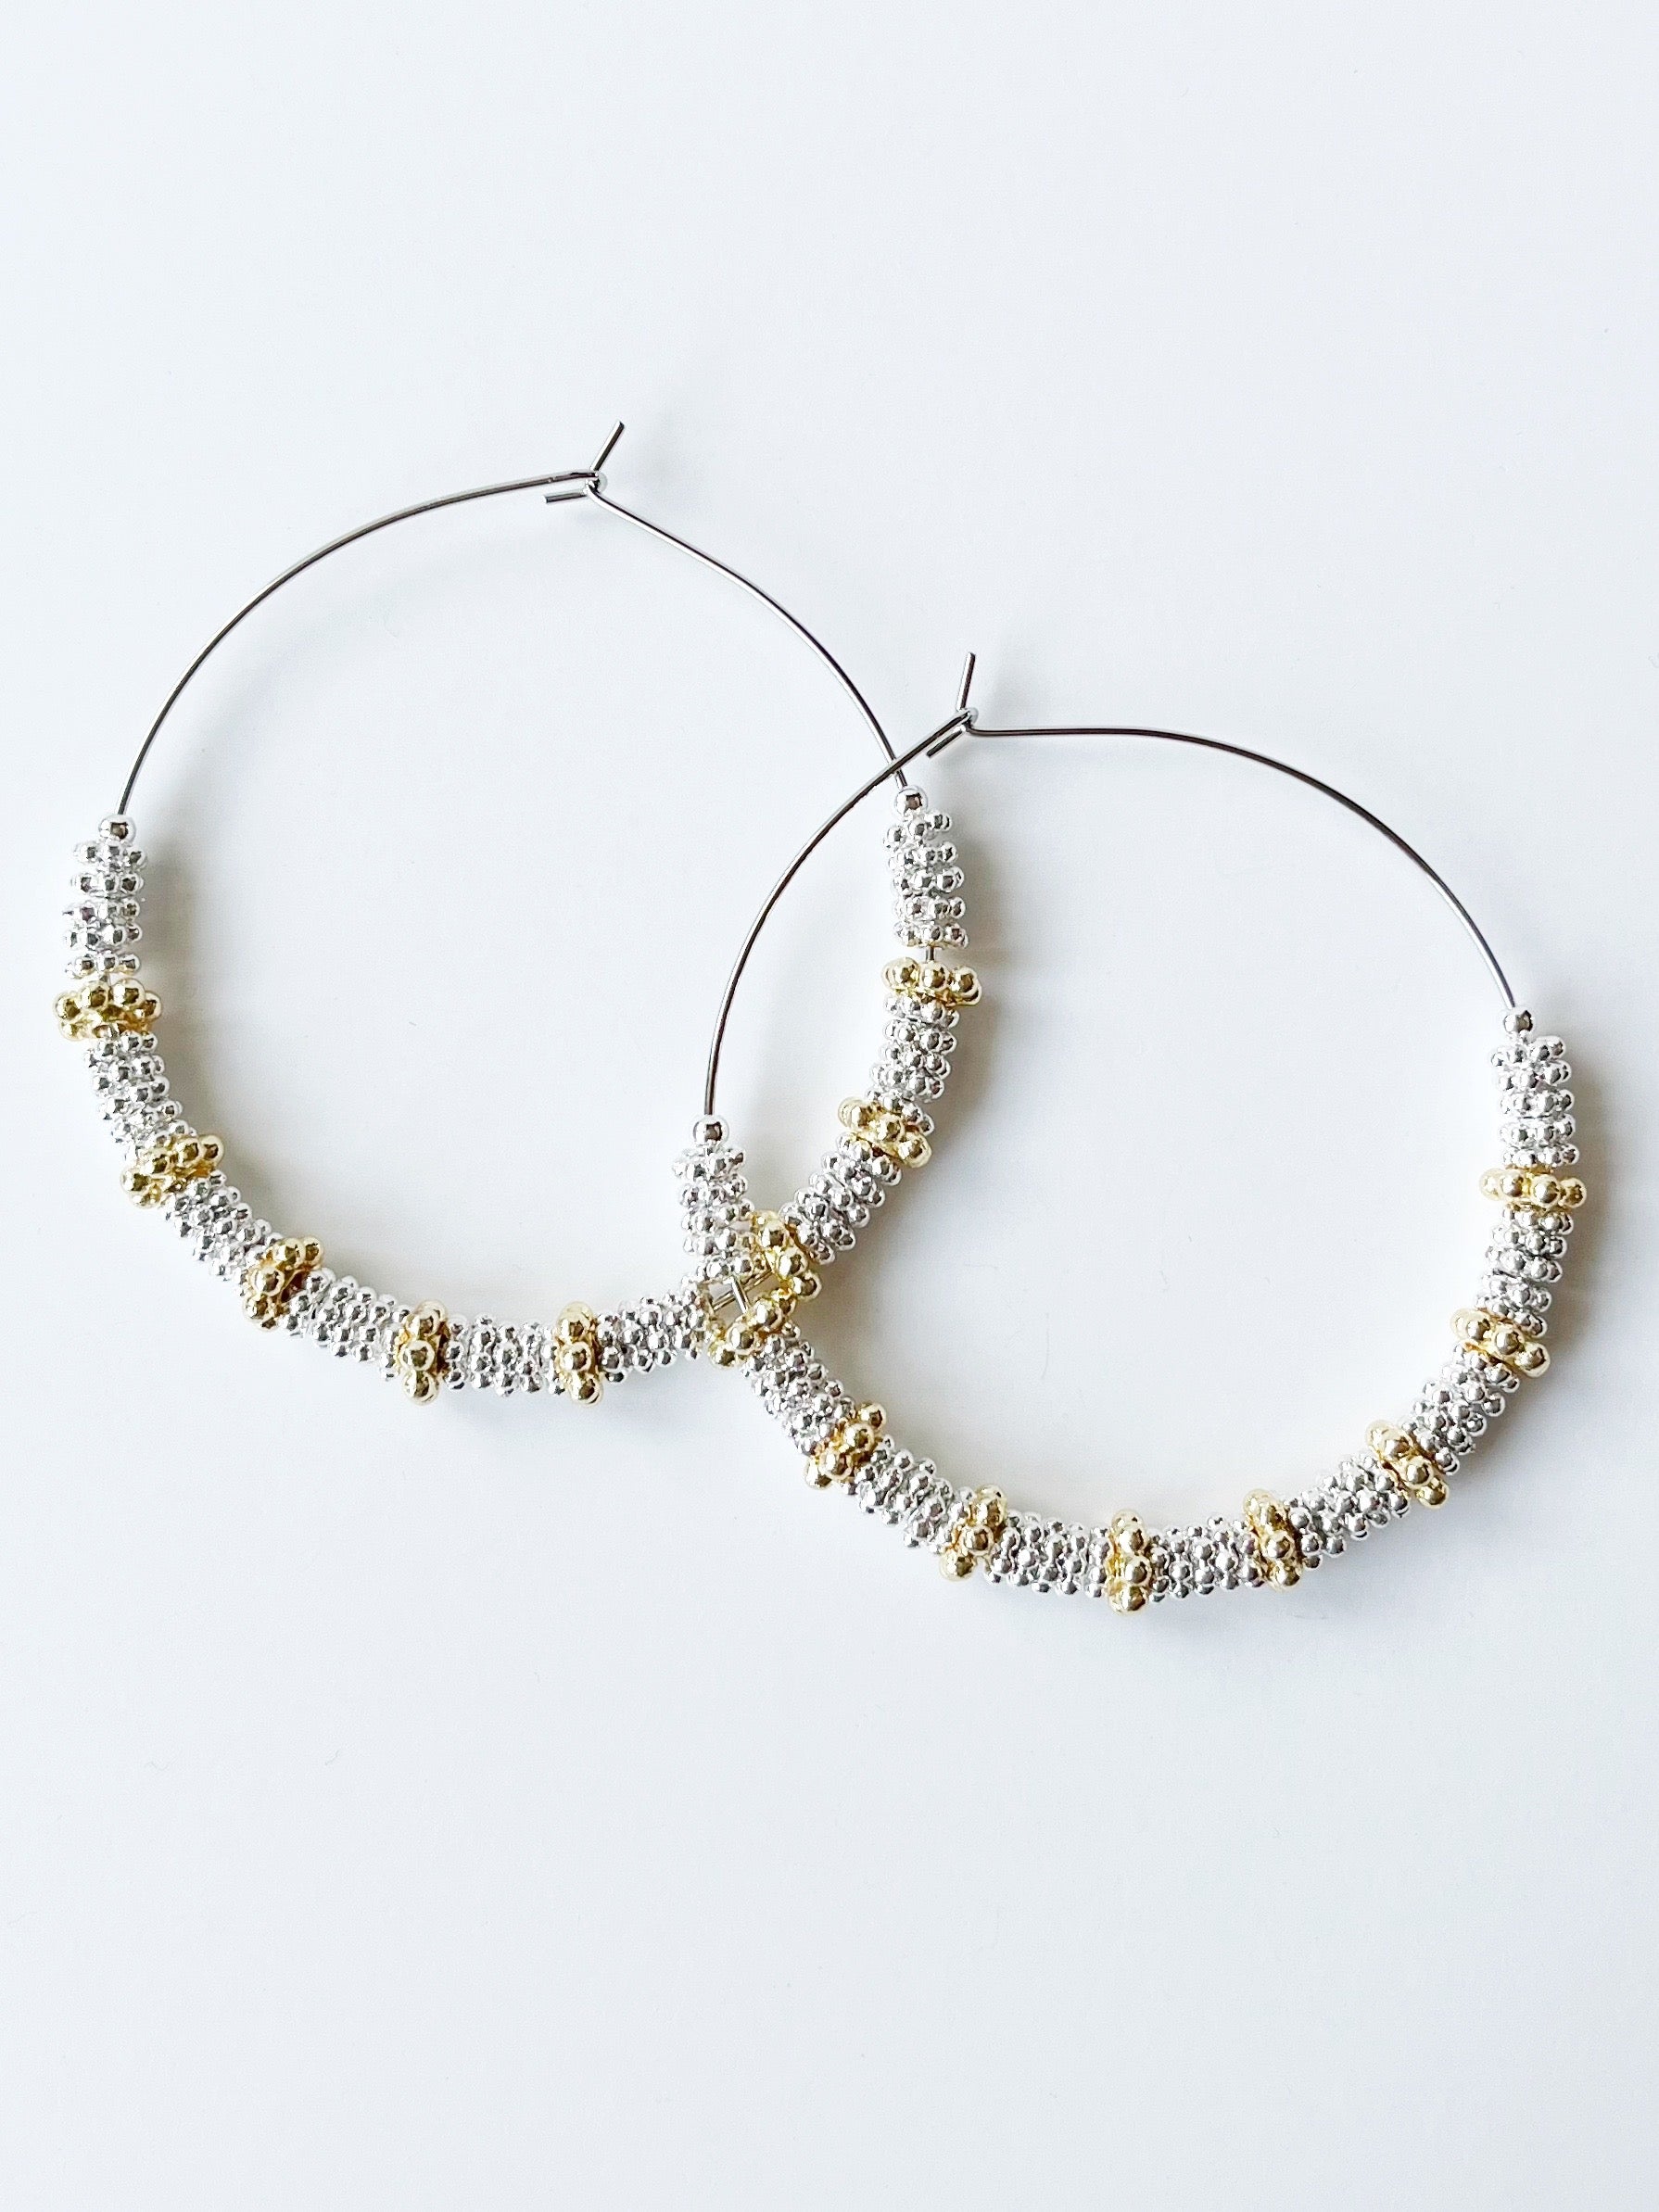 silver beaded hoop earrings with gold accents